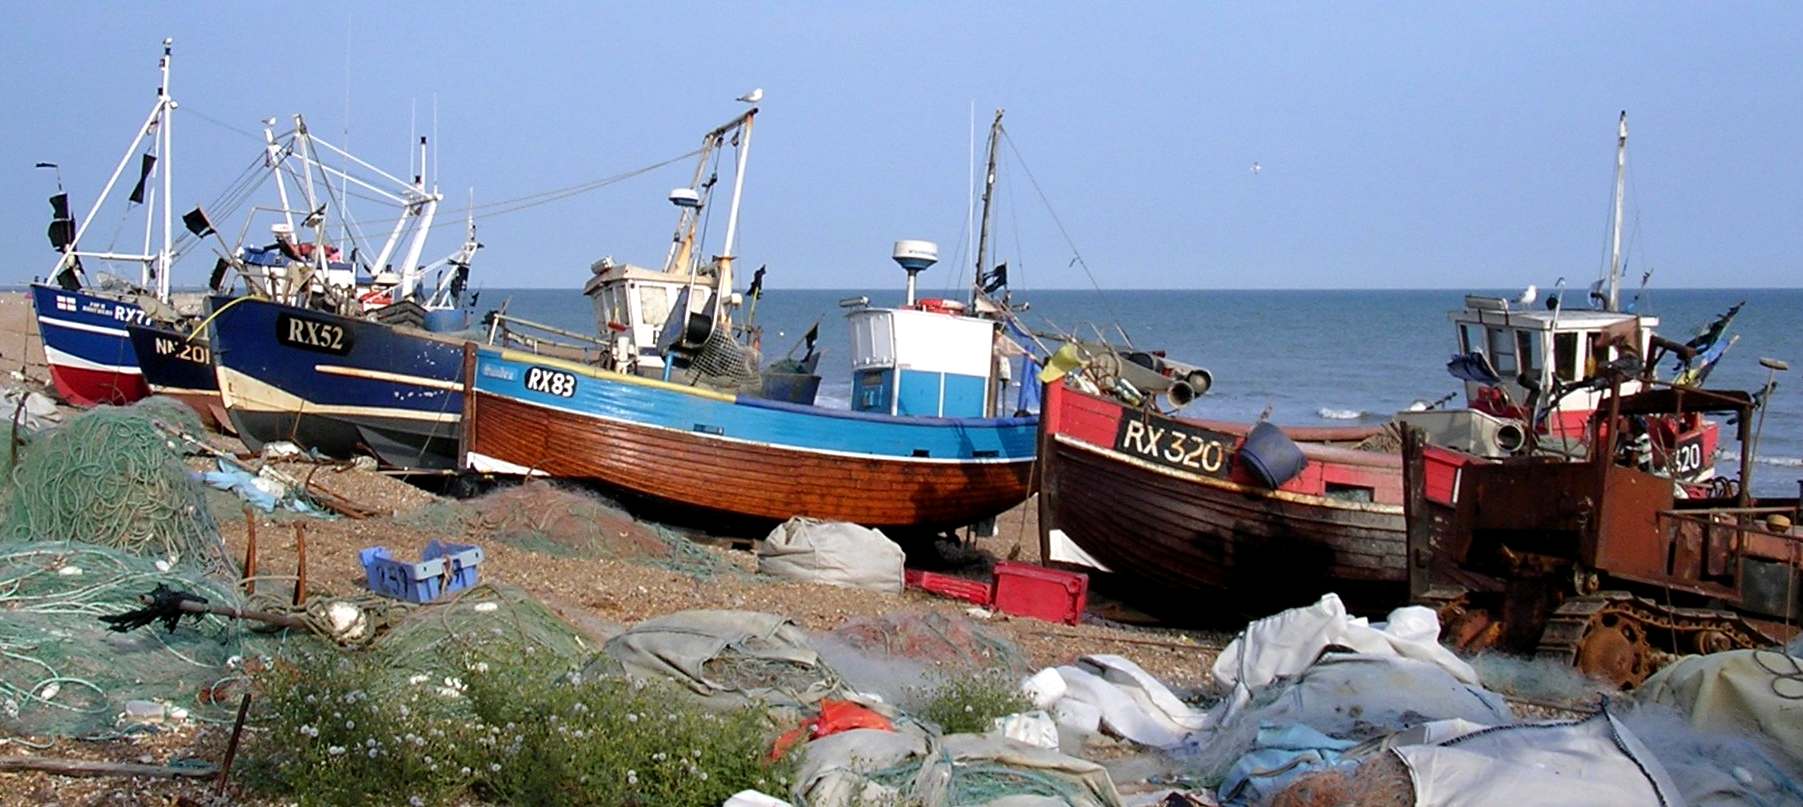 Fishing boats poluting the beaches in Sussex